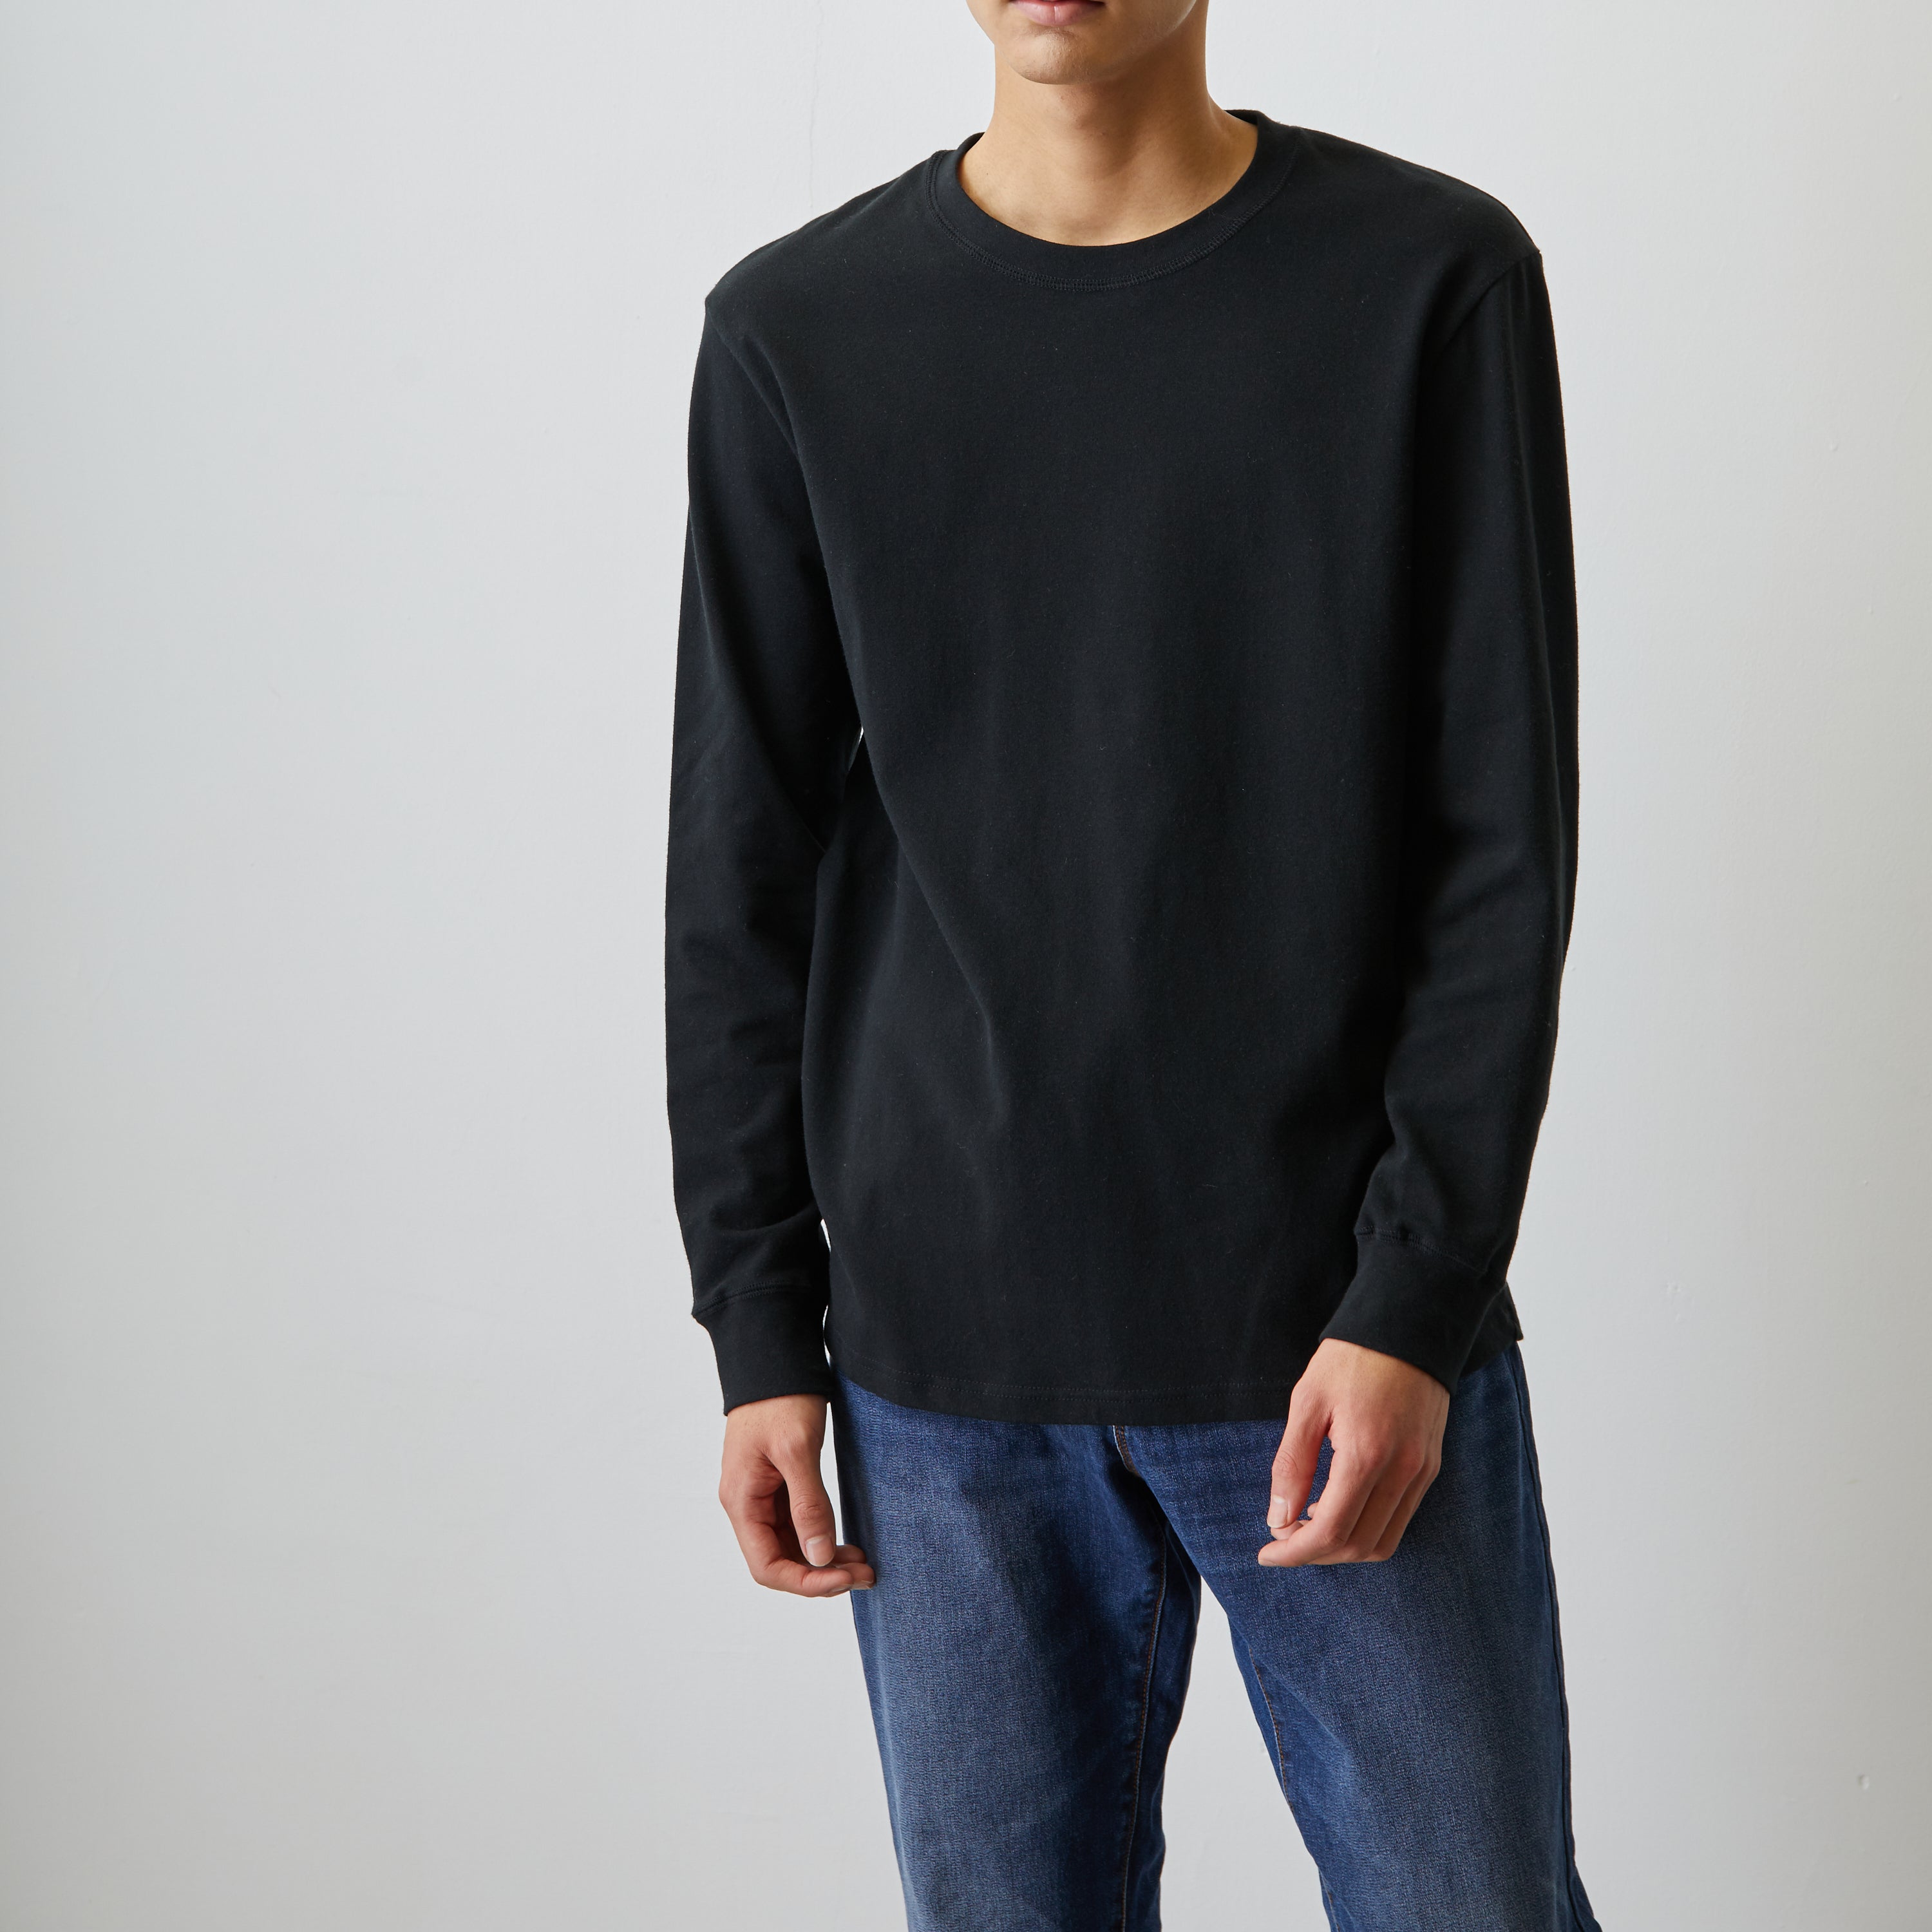 【SOLD OUT】The Long T-Shirts for Work